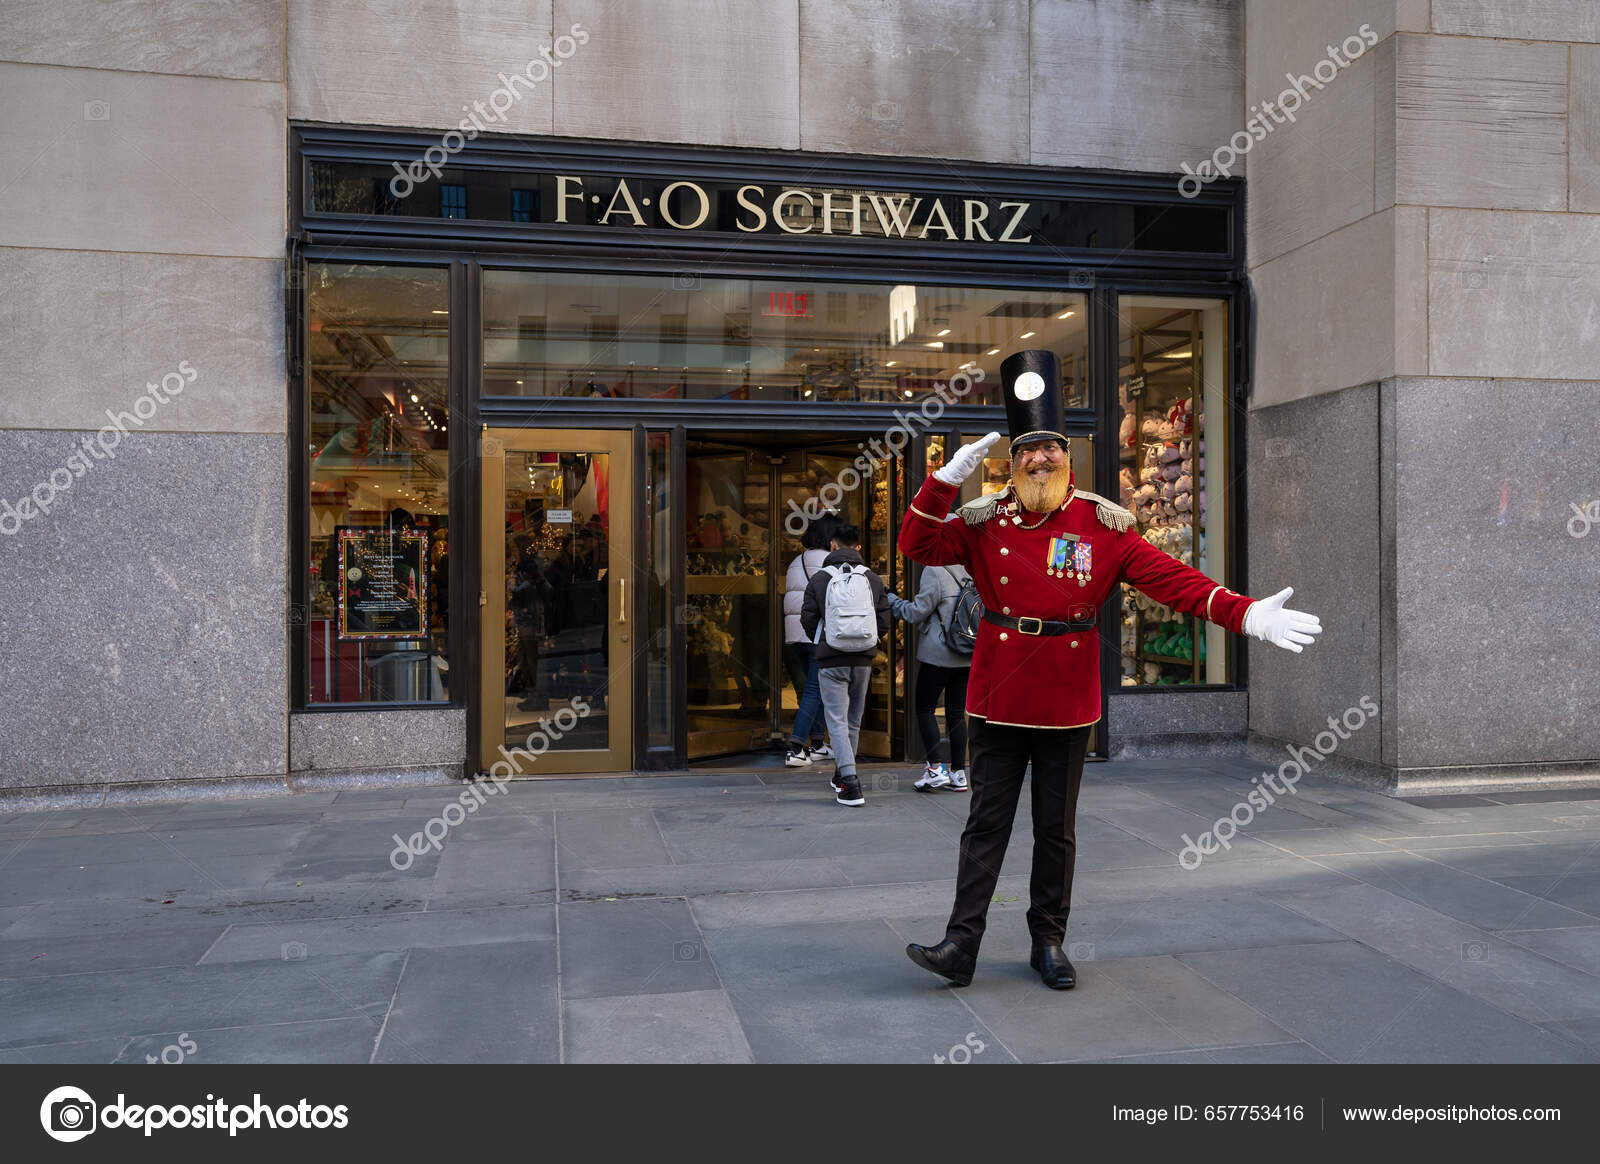 Historic FAO Schwarz Toy Reference